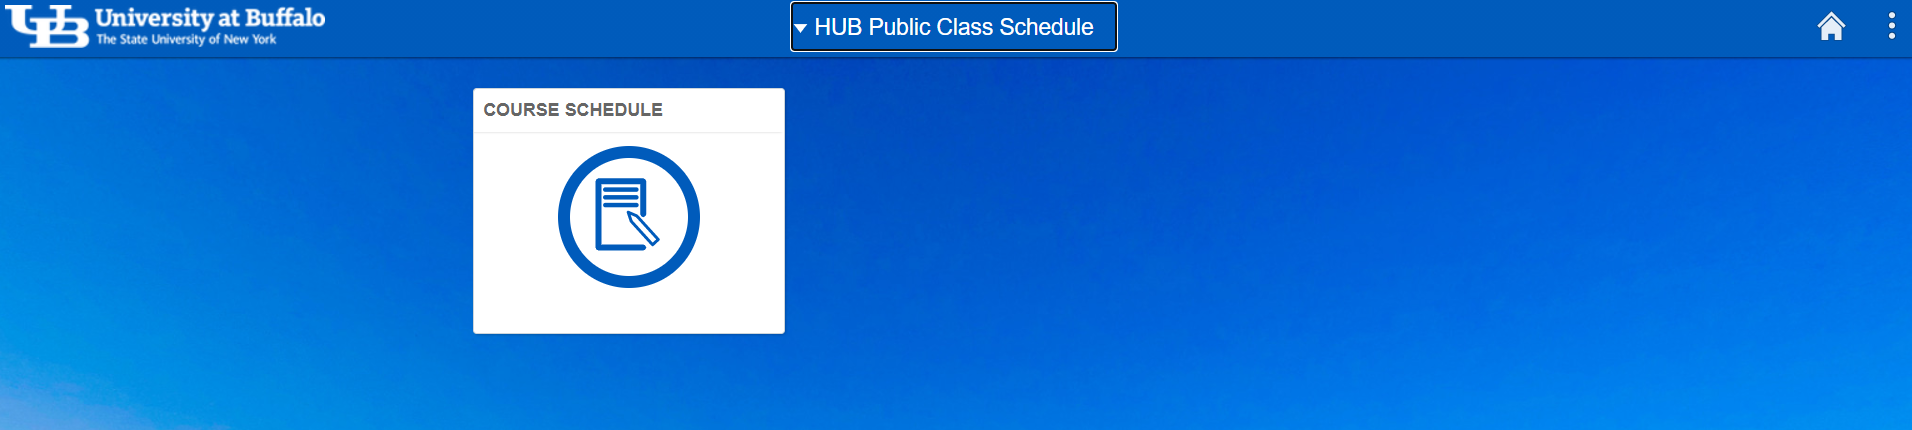 Screenshot of the UB Public Class Schedule home page with an arrow pointing to the Course Schedule tile.